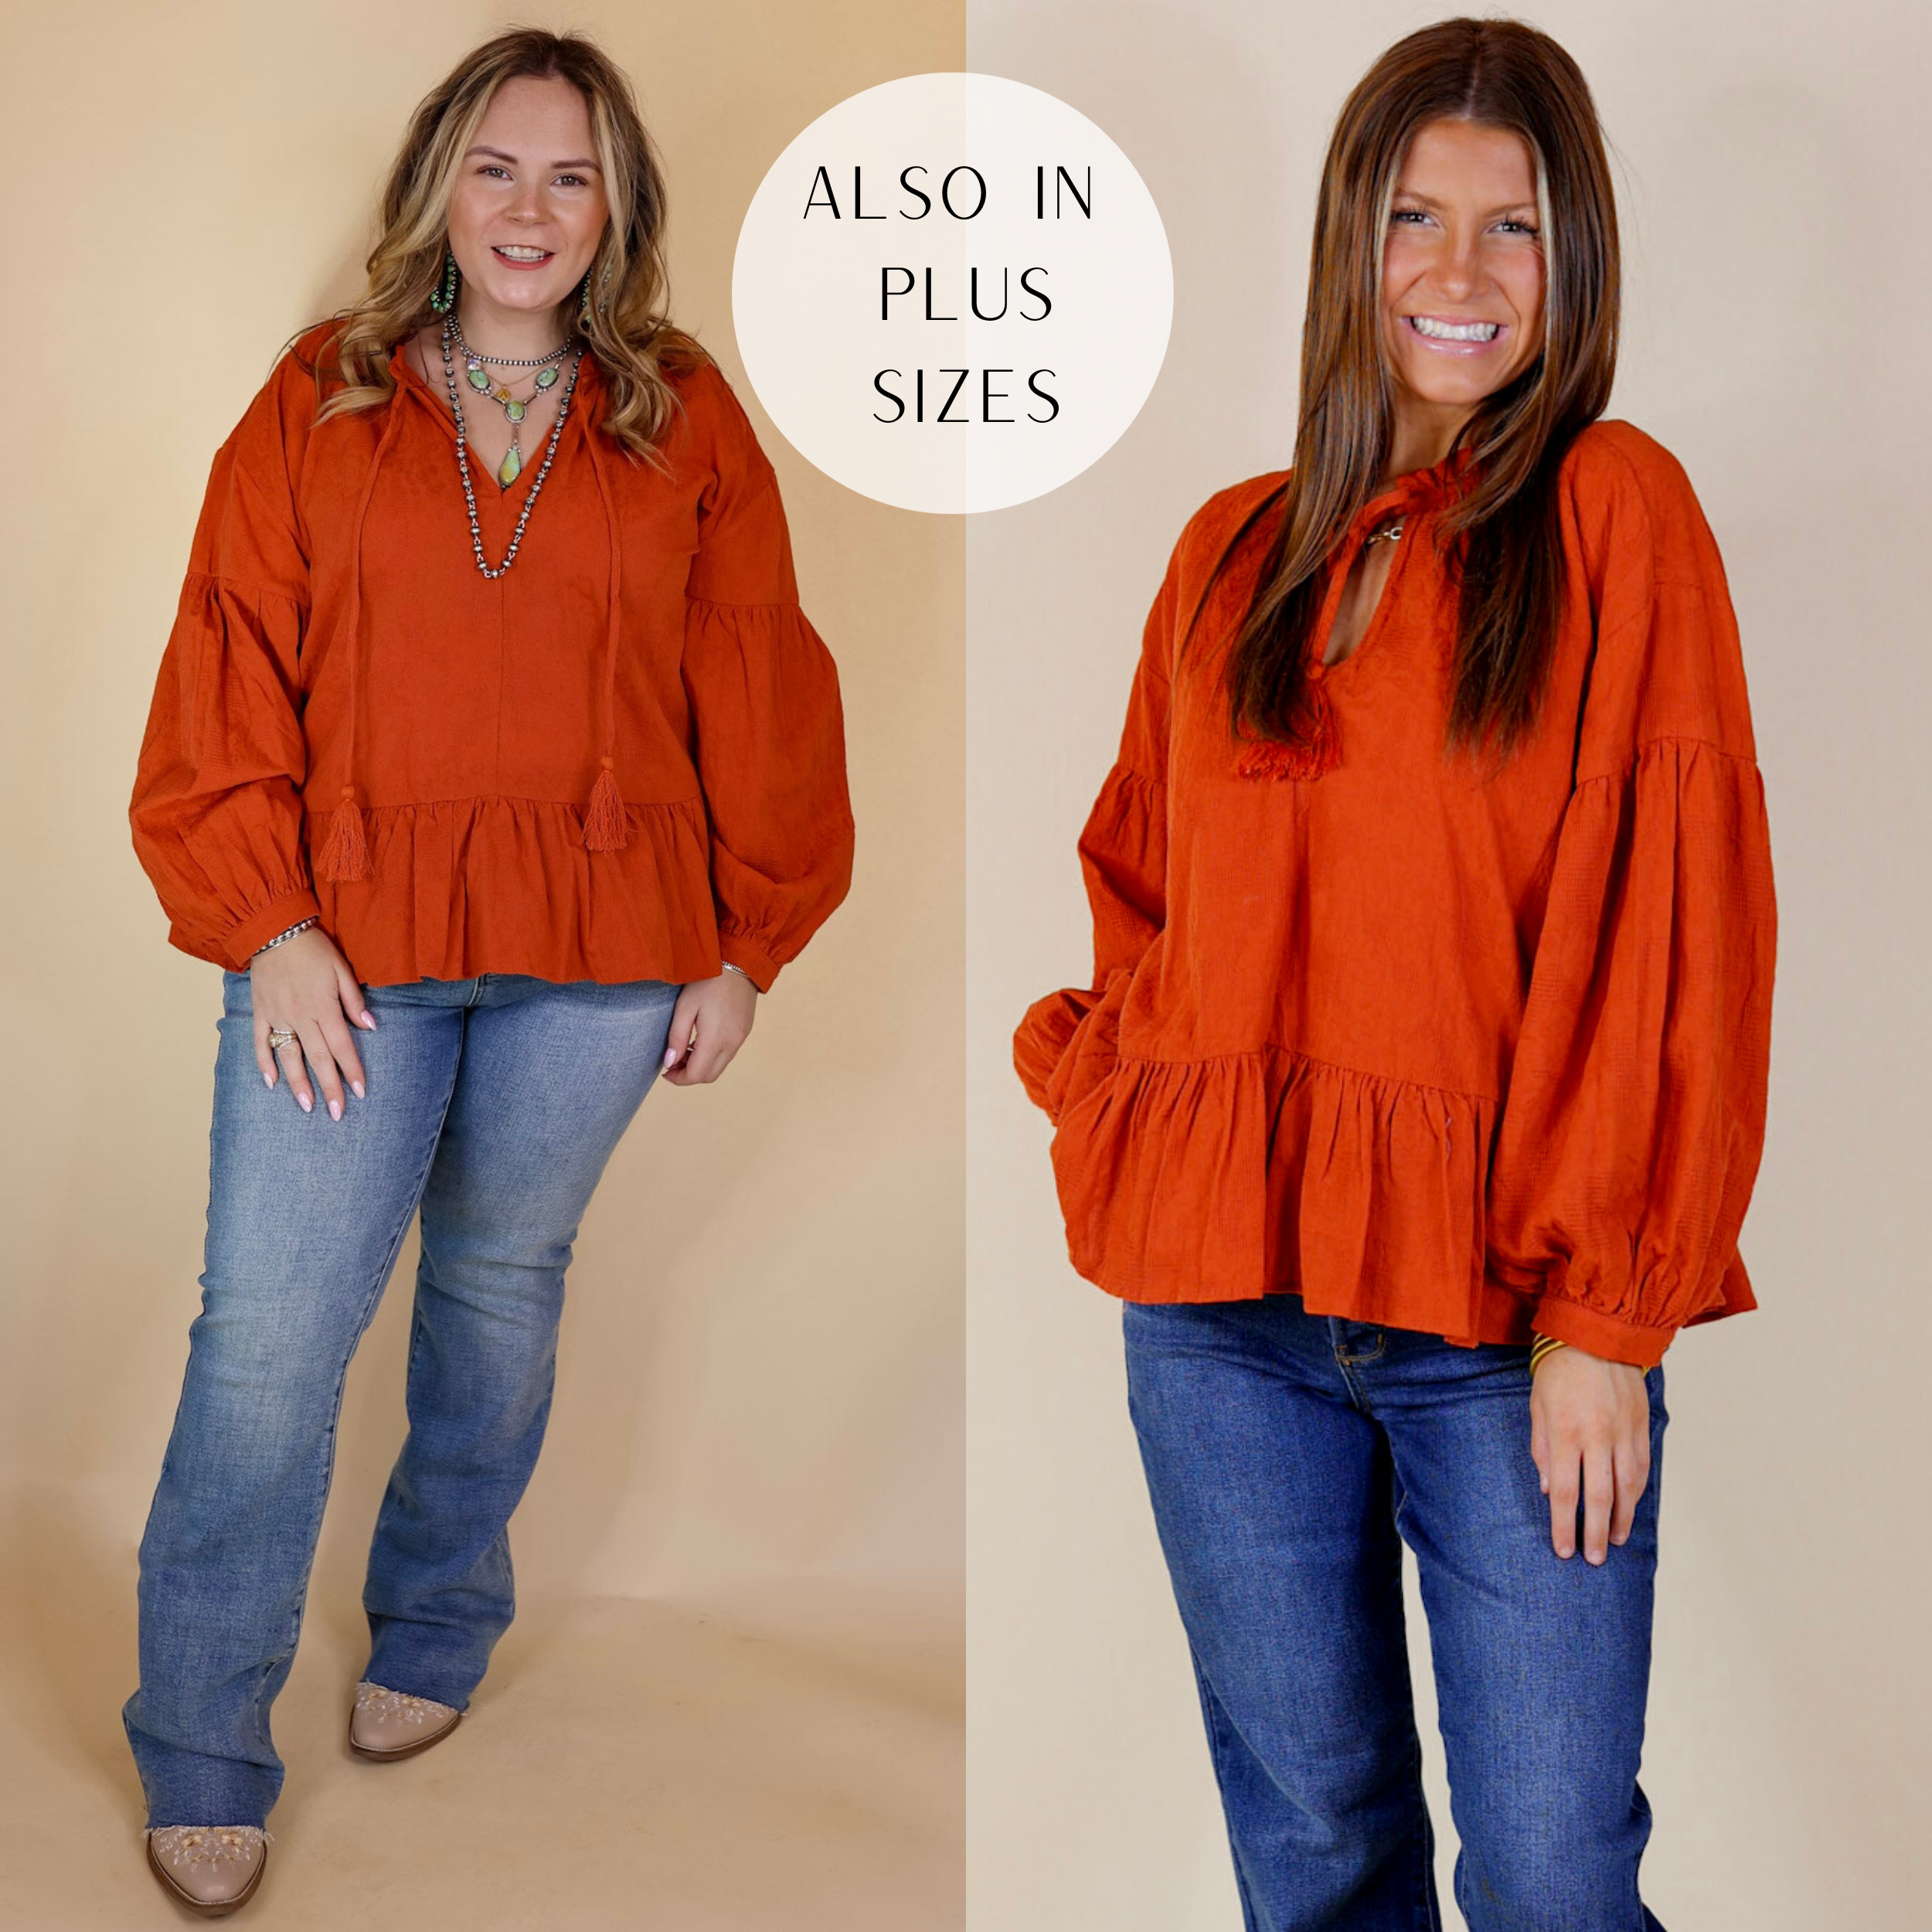 Model is wearing a textured long sleeve peplum top with a front keyhole in orange. Model has this top paired with jeans, booties, and Navajo jewelry. Background is solid tan.